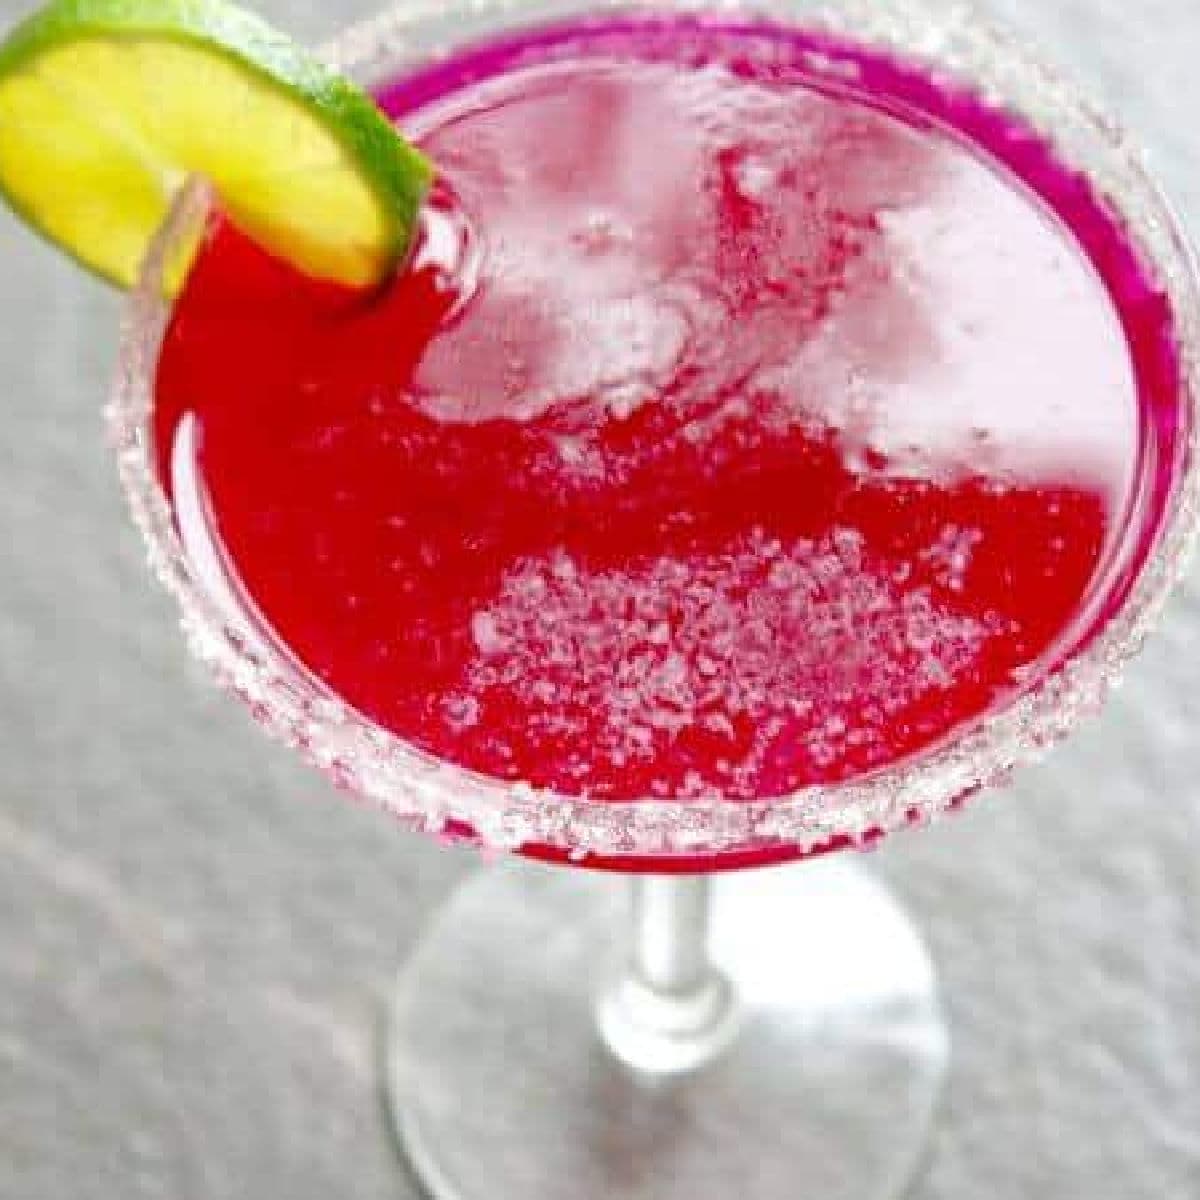 Overhead view of the bright pink margarita.